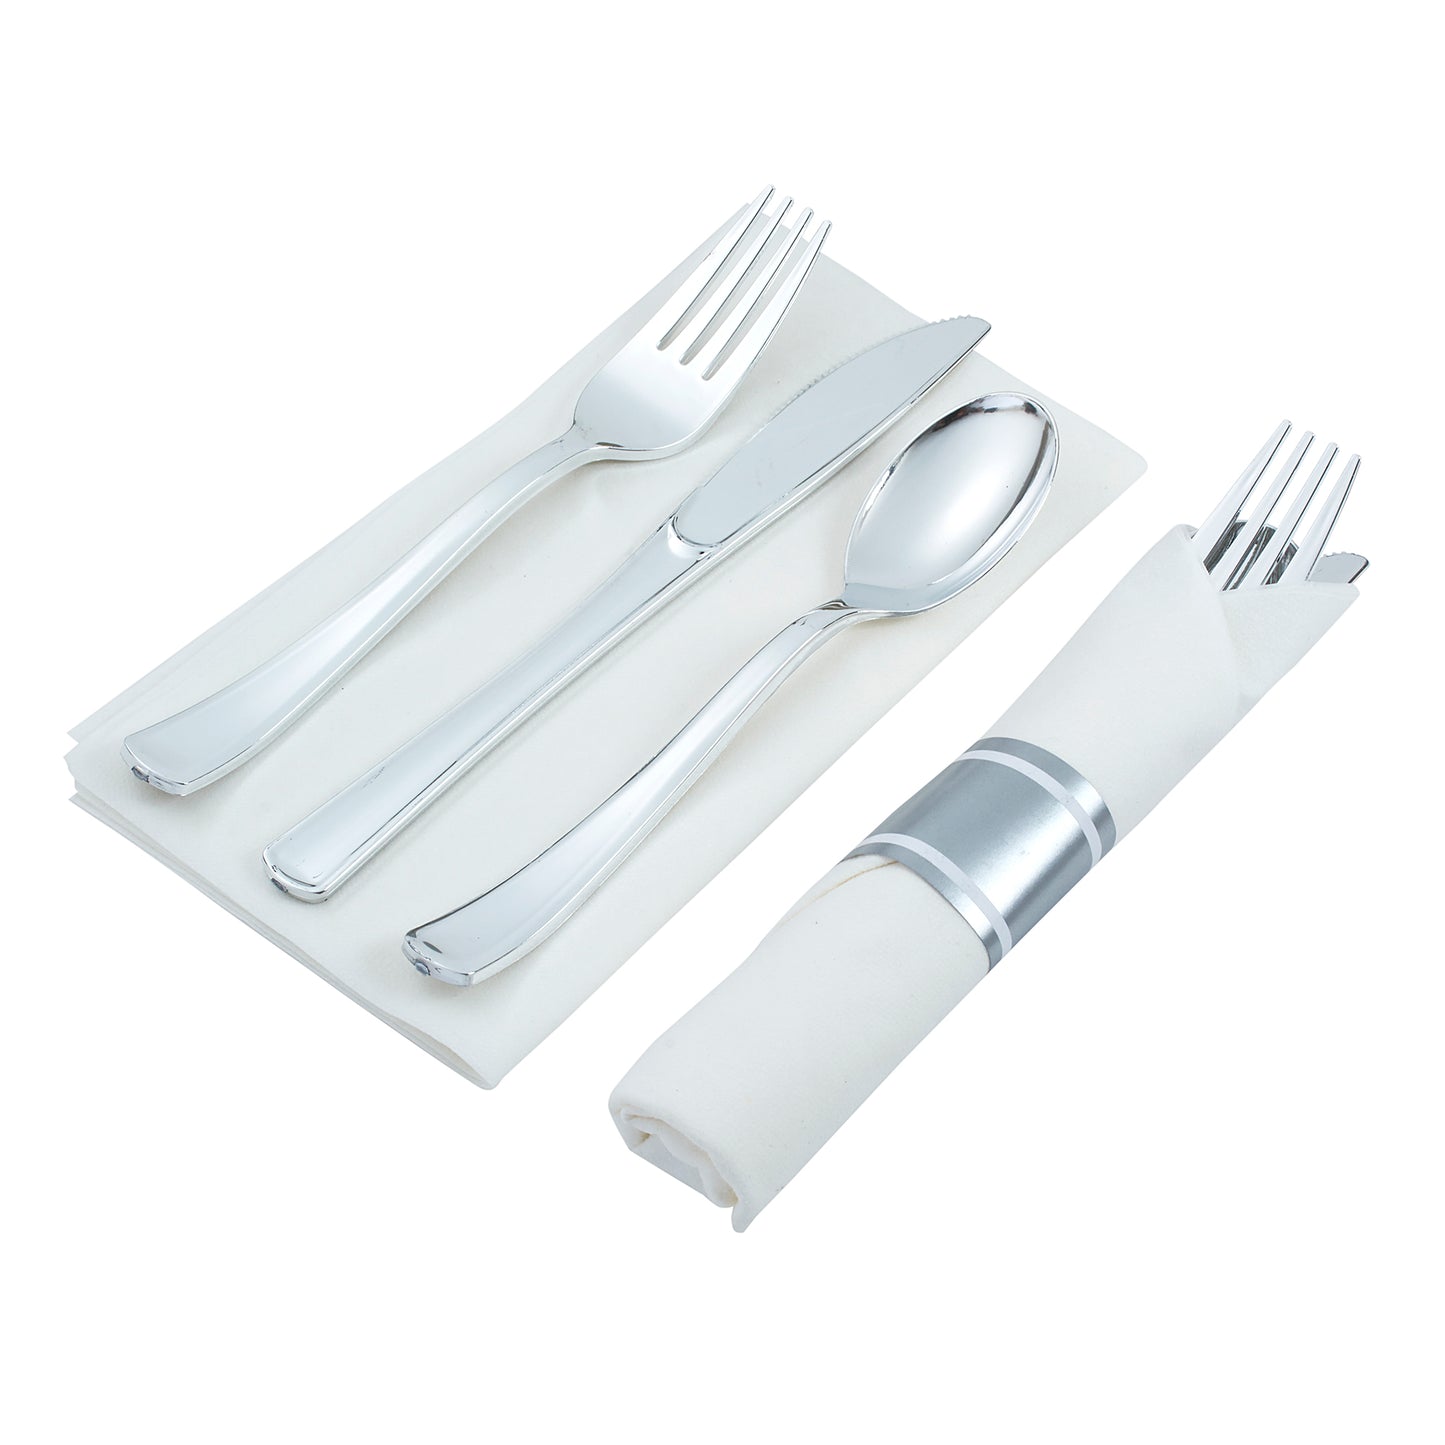 200 Piece Pre-rolled silver-colored plastic silverware set (for 50 guests) In each napkin pack, you will find 1 fork, 1 knife, and 1 spoon, all wrapped up inside.